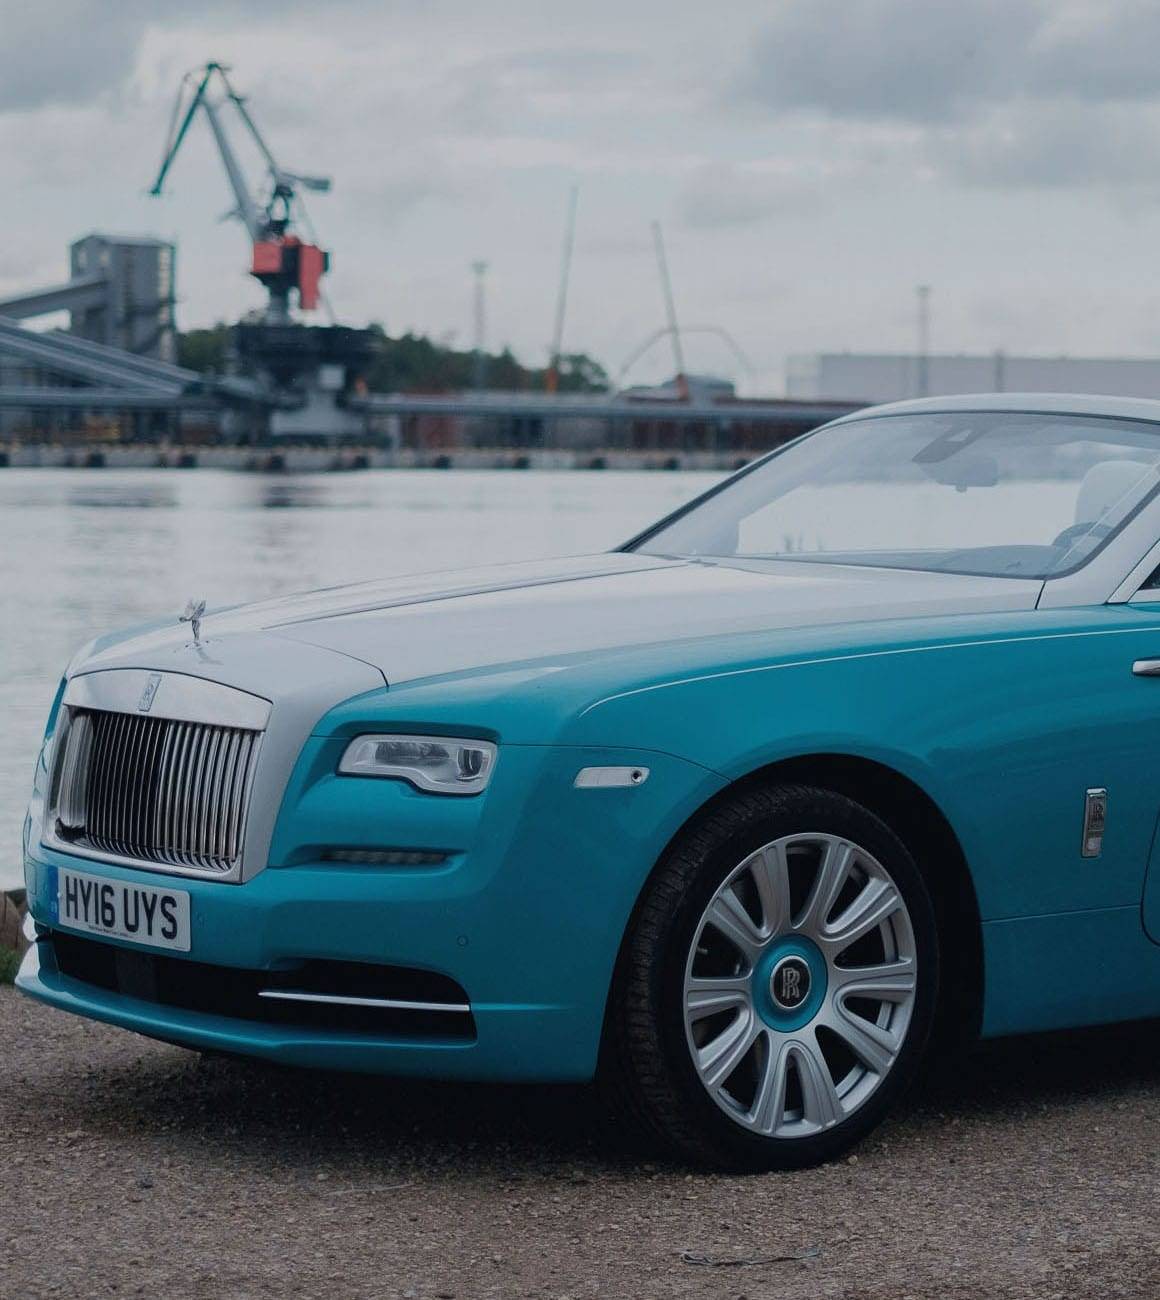 RollsRoyce Spectre First electric car unveiled for British carmaker